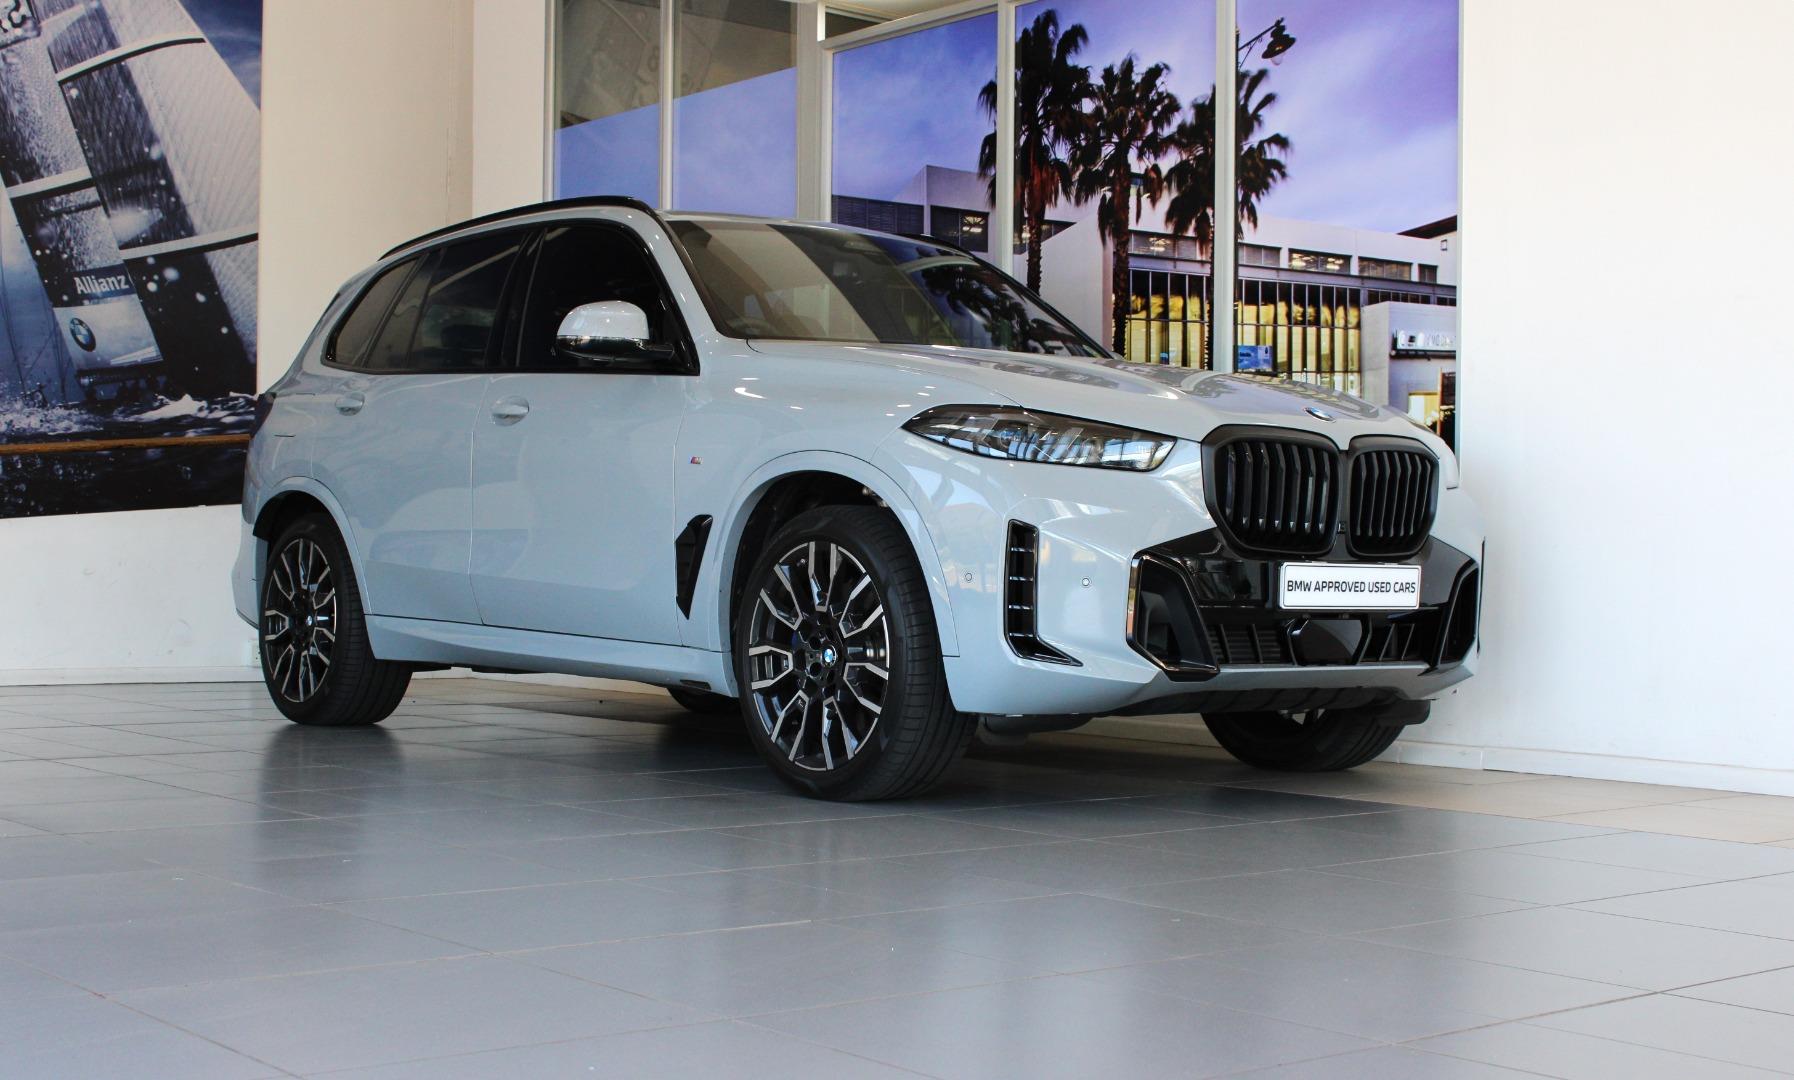 2024 BMW  X5 xDRIVE30d M SPORT (G05)  for sale - SMG12|USED|115276